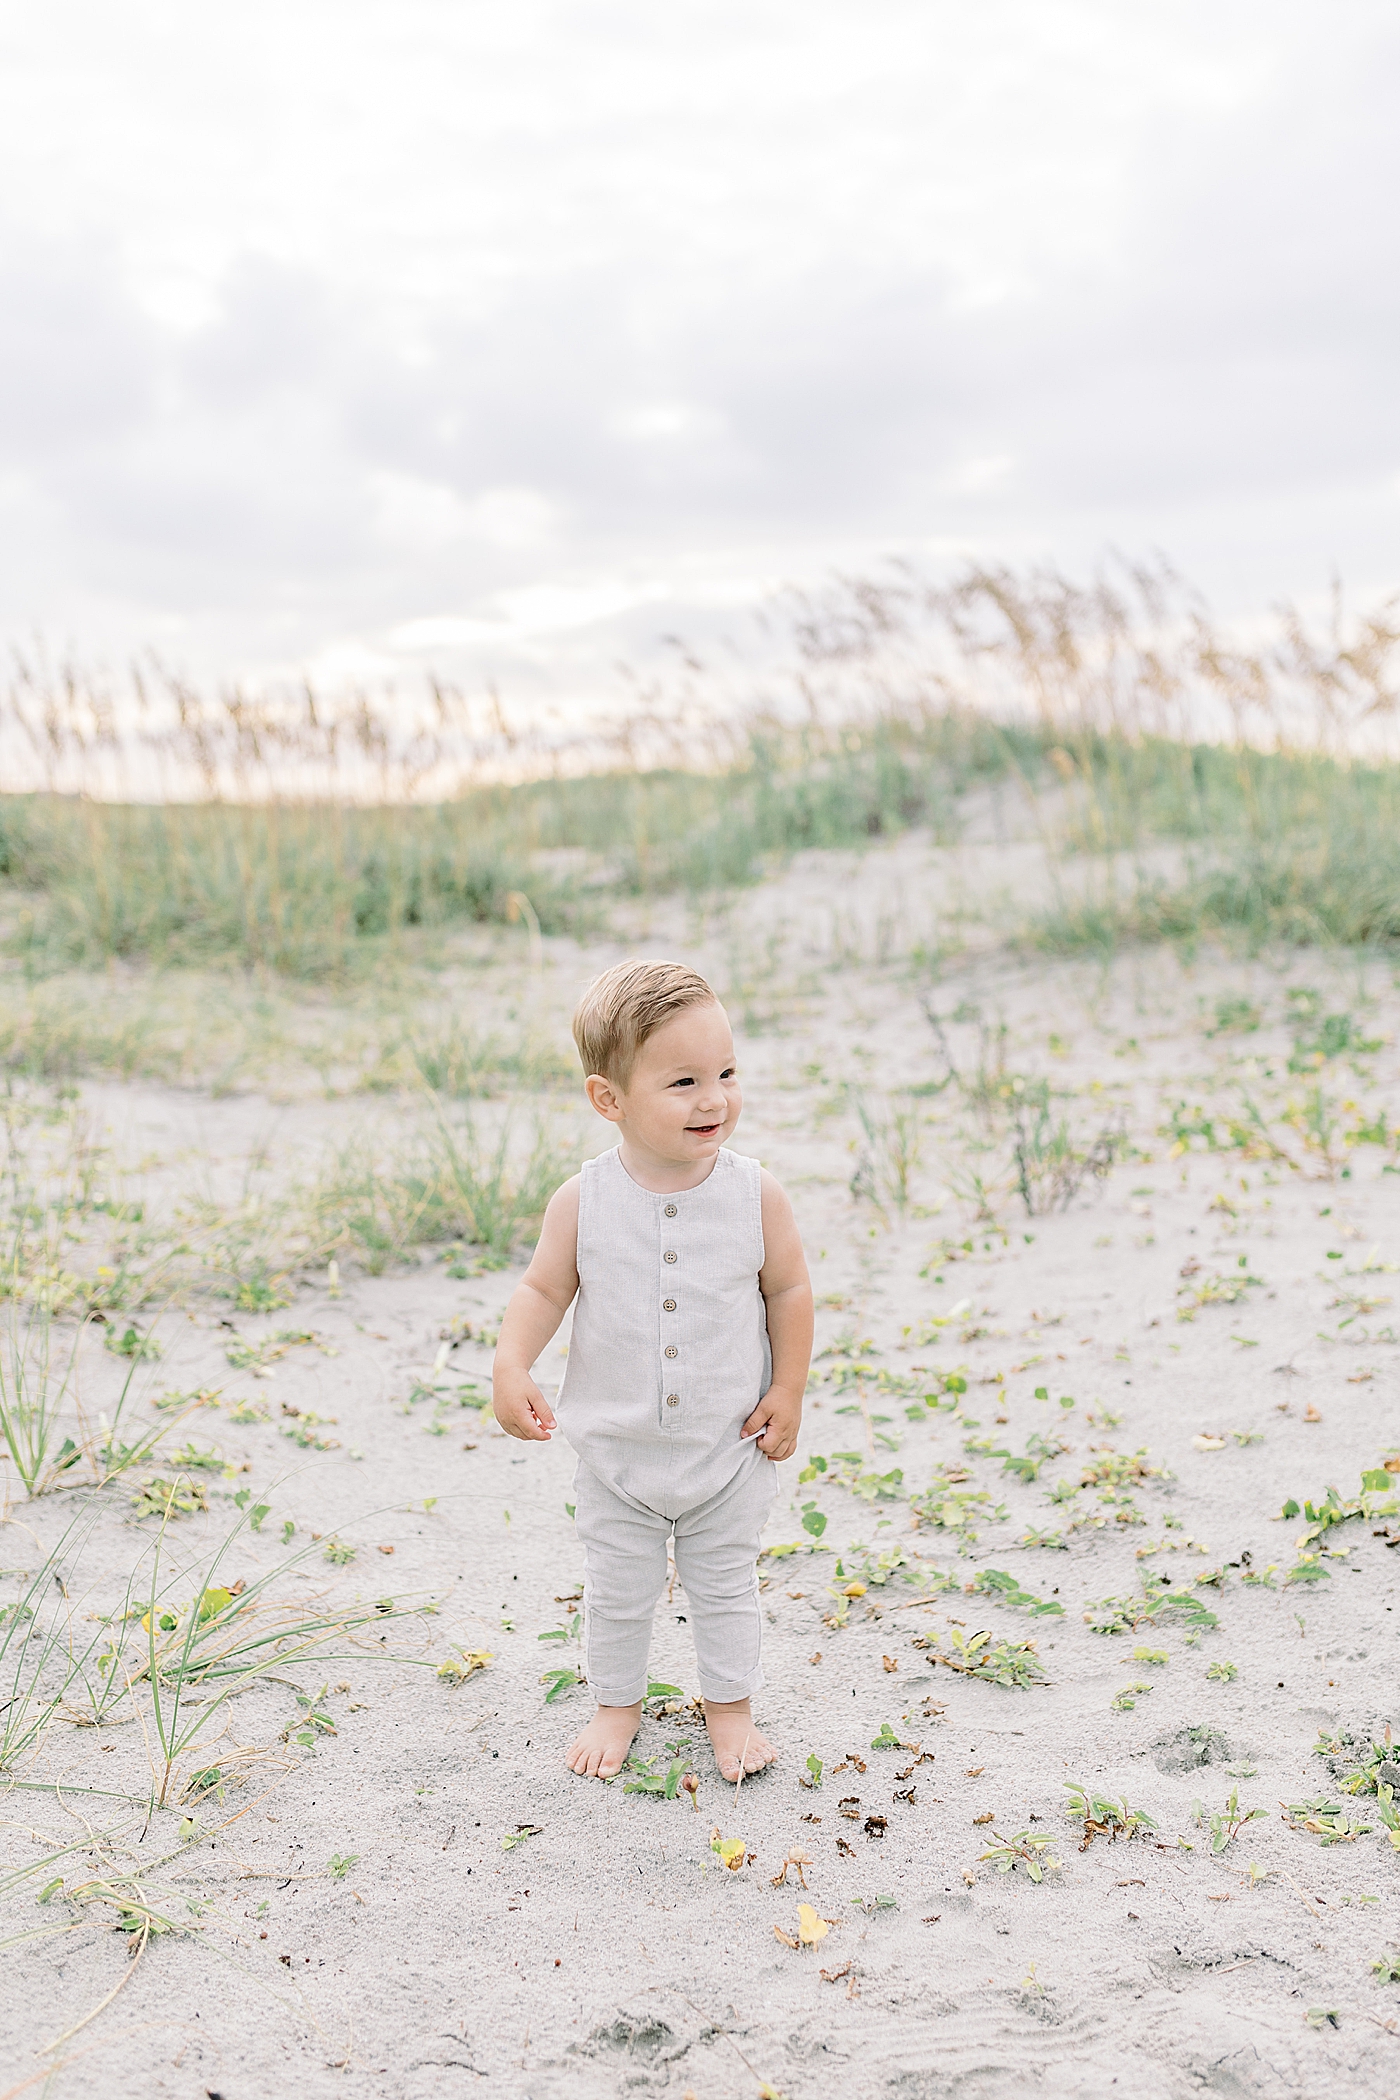 Baby boy walking near sand dunes | Preparing for Family Beach Session with Caitlyn Motycka